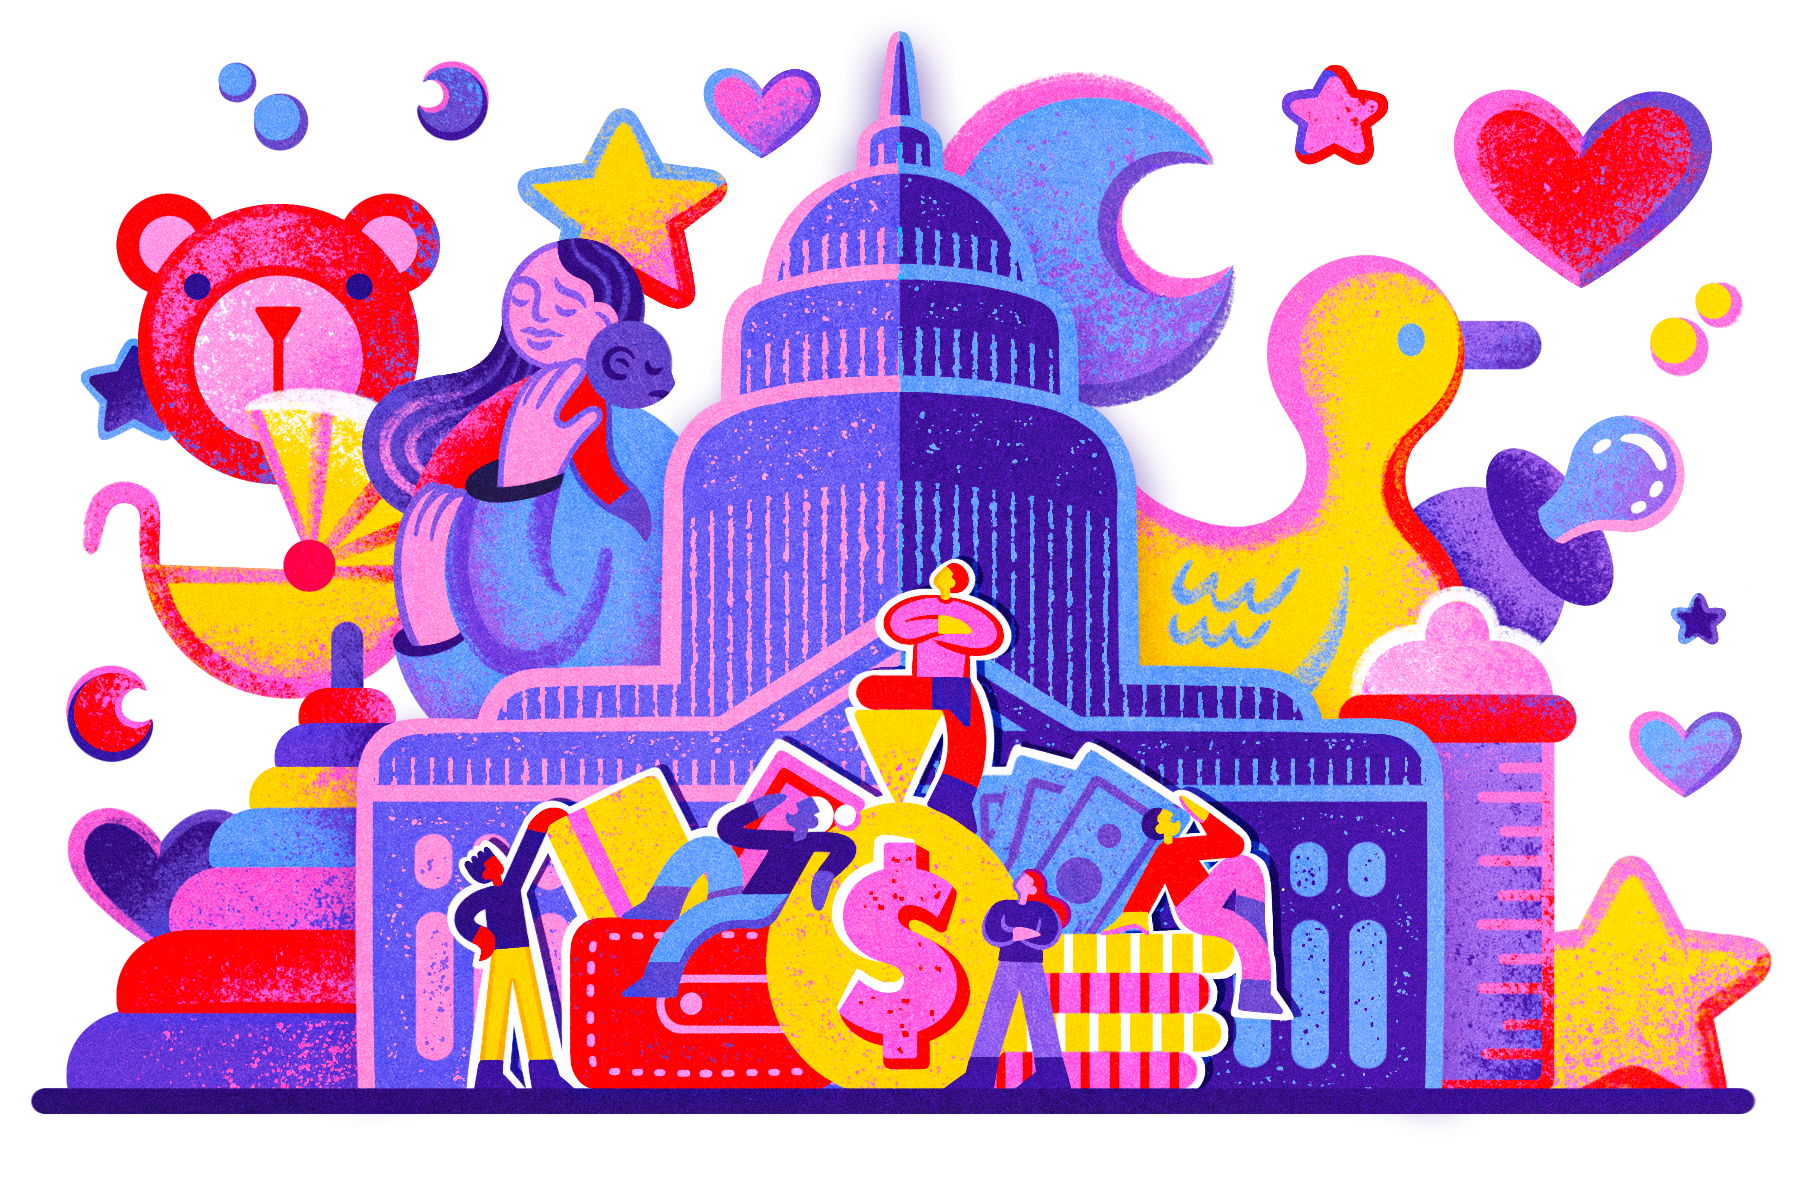 An illustration focused on childcare and congress. The illustration has the nation's Capitol with a baby bottles, pacifier, and stacking rings. Seemingly "lazy "lawmakers sit atop government funds.